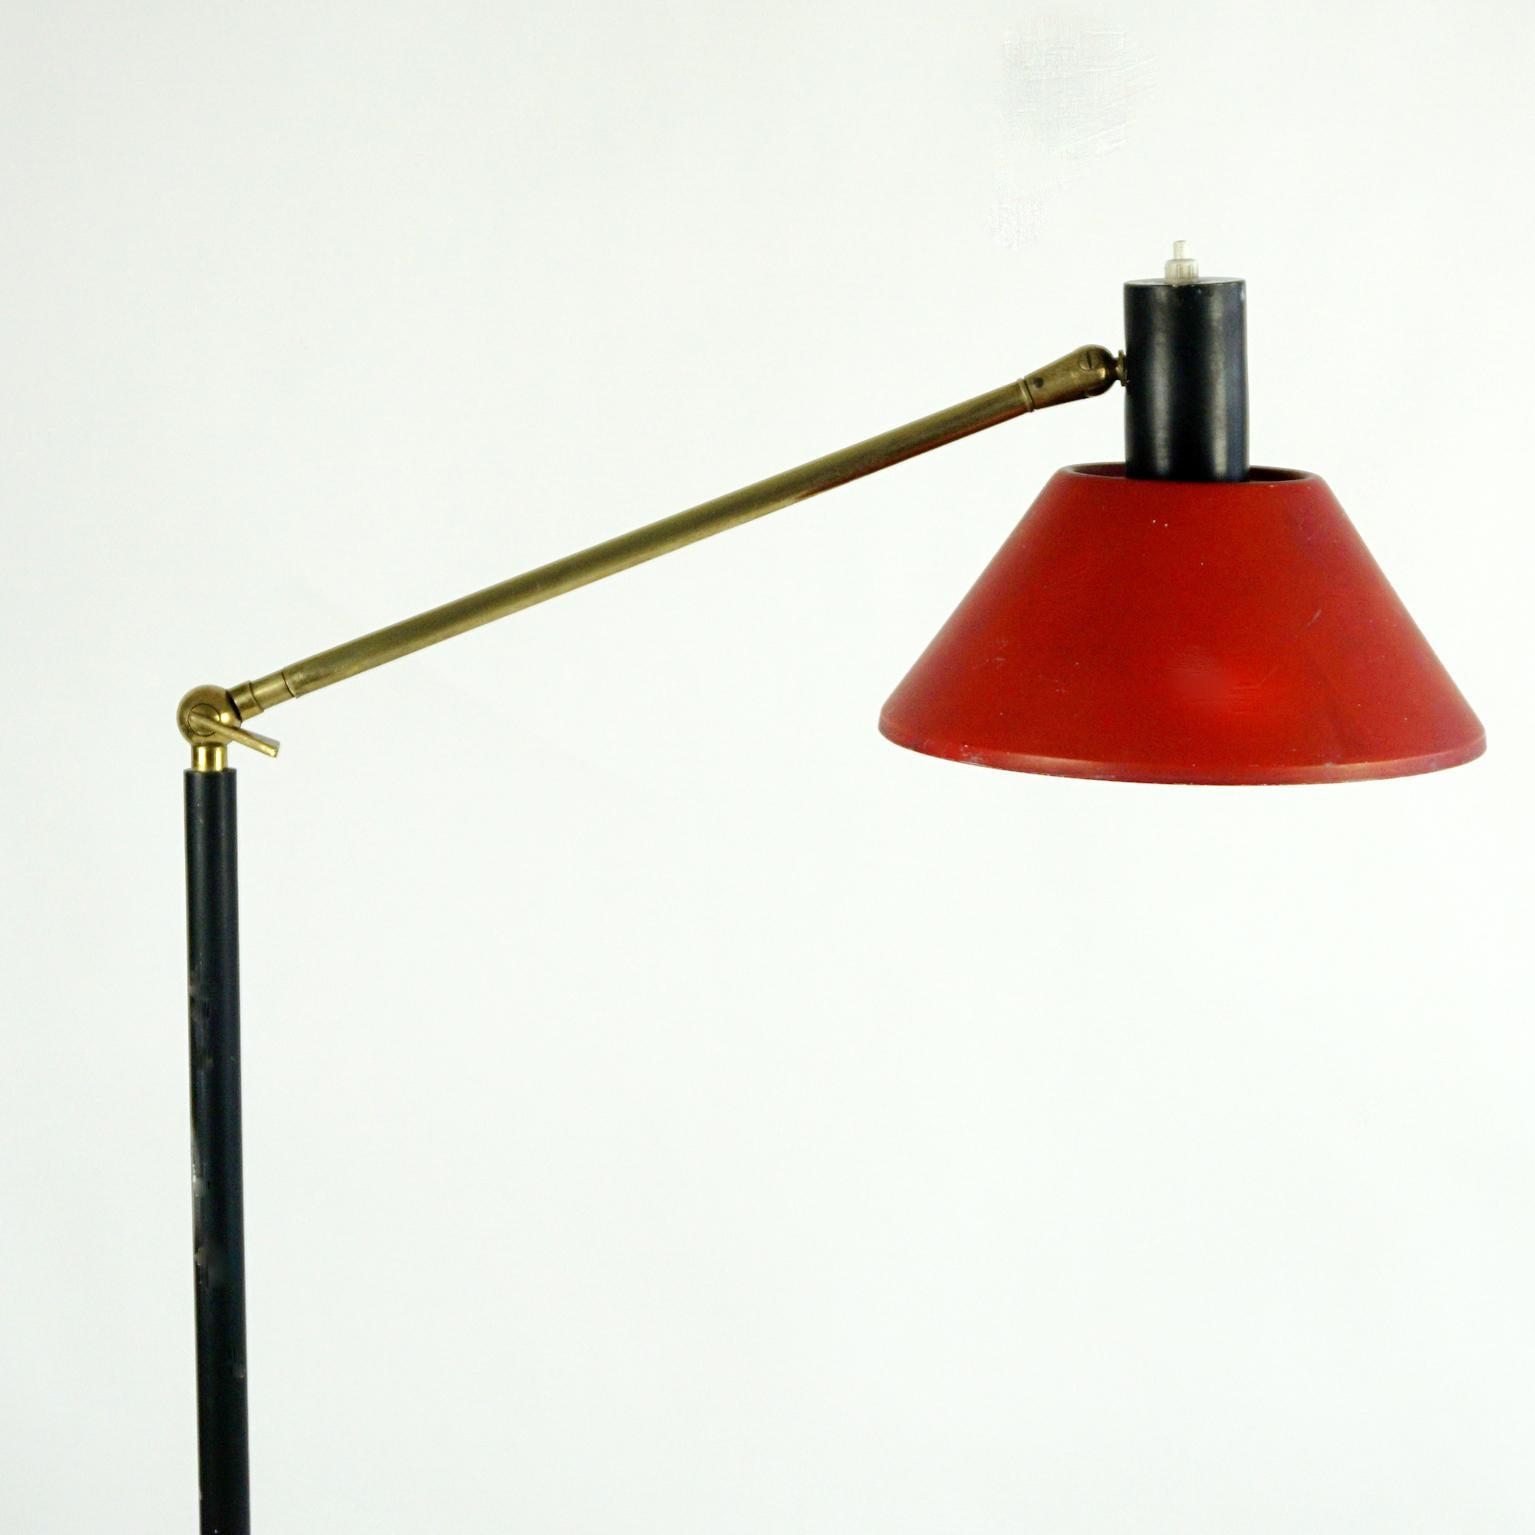 Space Age Italian Midcentury Brass, Marble and Red Lacquer Floorlamp by Stilux Milano